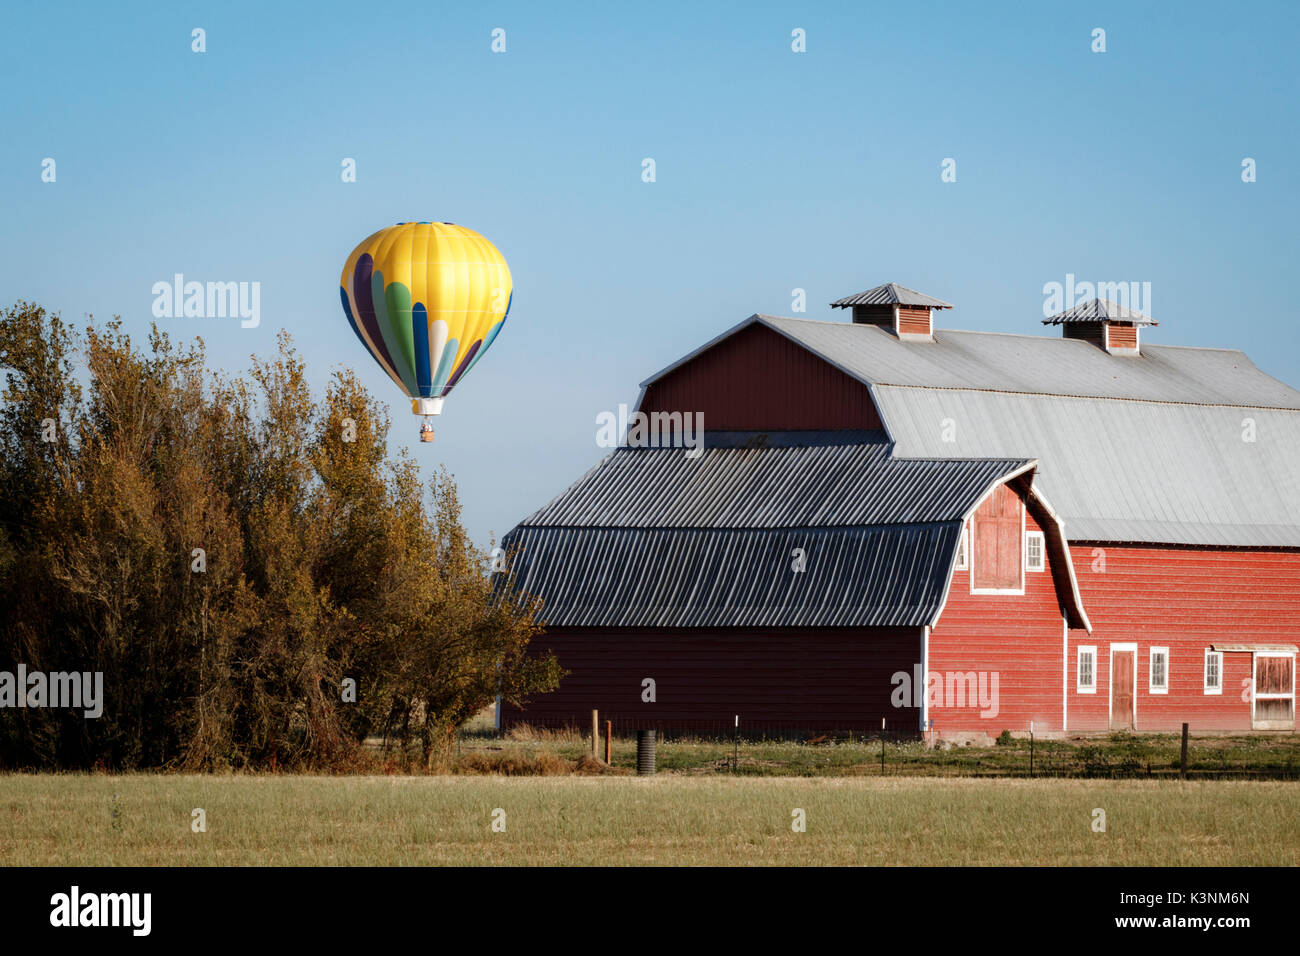 A bright yellow hot air balloon floats by a barn in rural Oregon, USA. Stock Photo